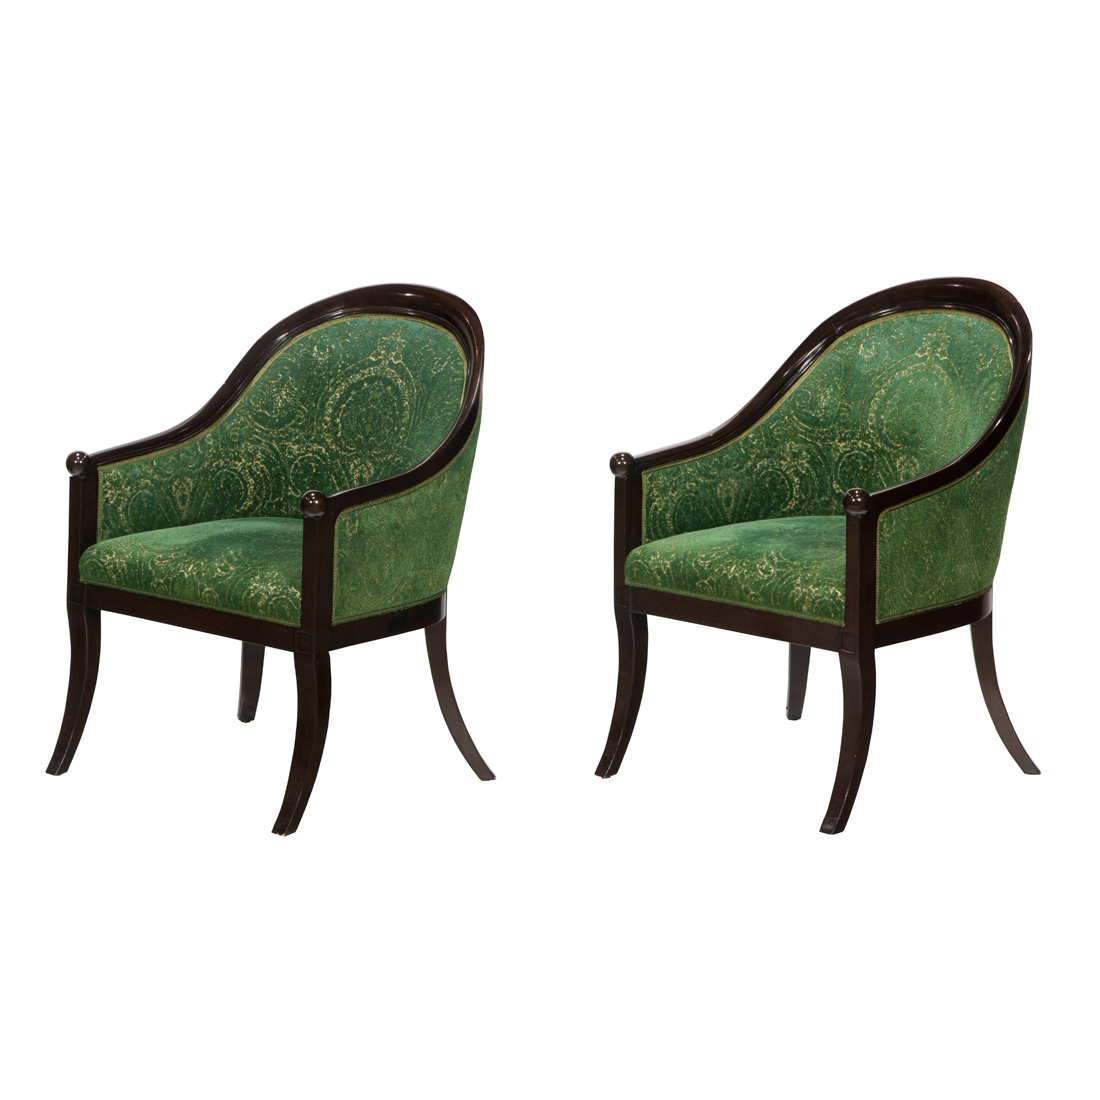 ROSE TARLOW MONTPELIER CHAIRS  3a181a